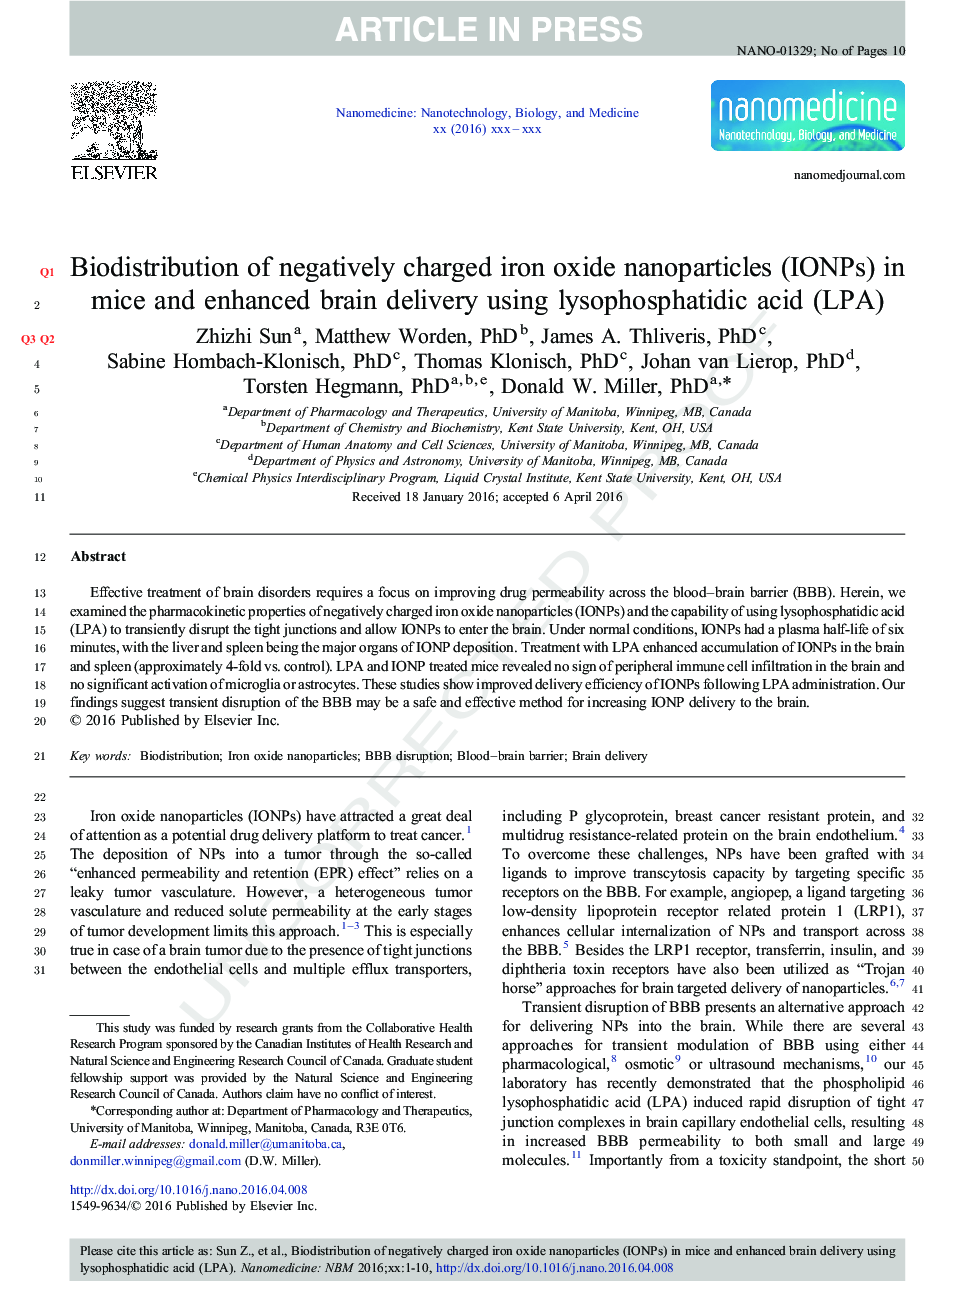 Biodistribution of negatively charged iron oxide nanoparticles (IONPs) in mice and enhanced brain delivery using lysophosphatidic acid (LPA)